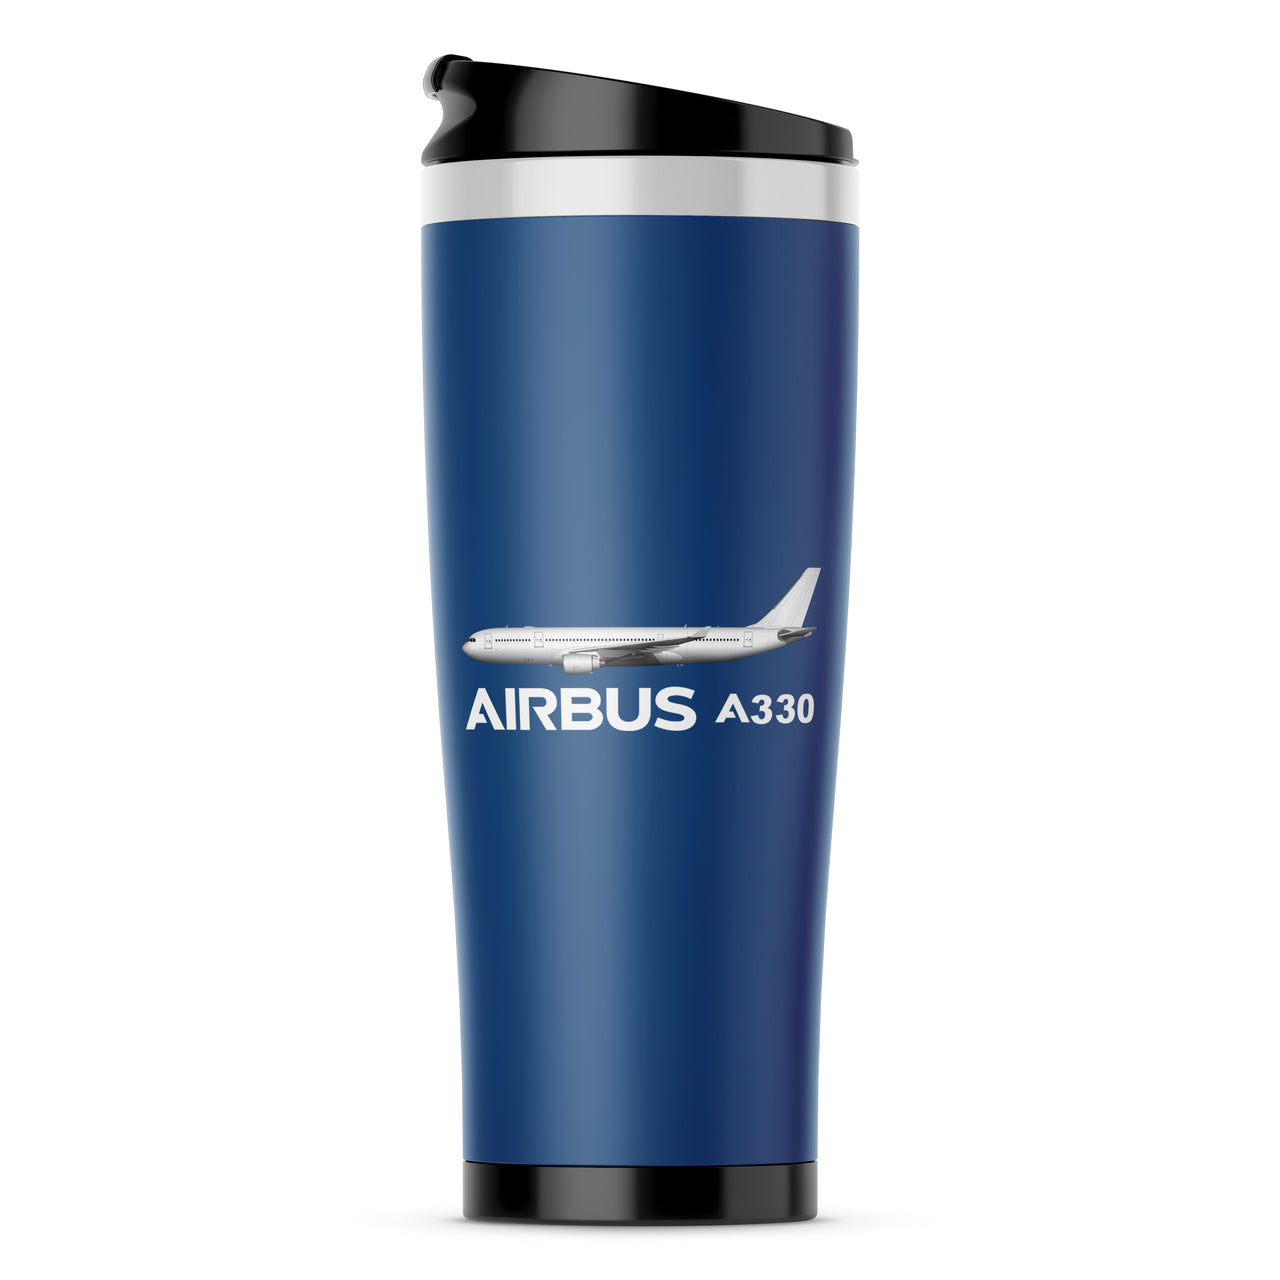 The Airbus A330 Designed Travel Mugs